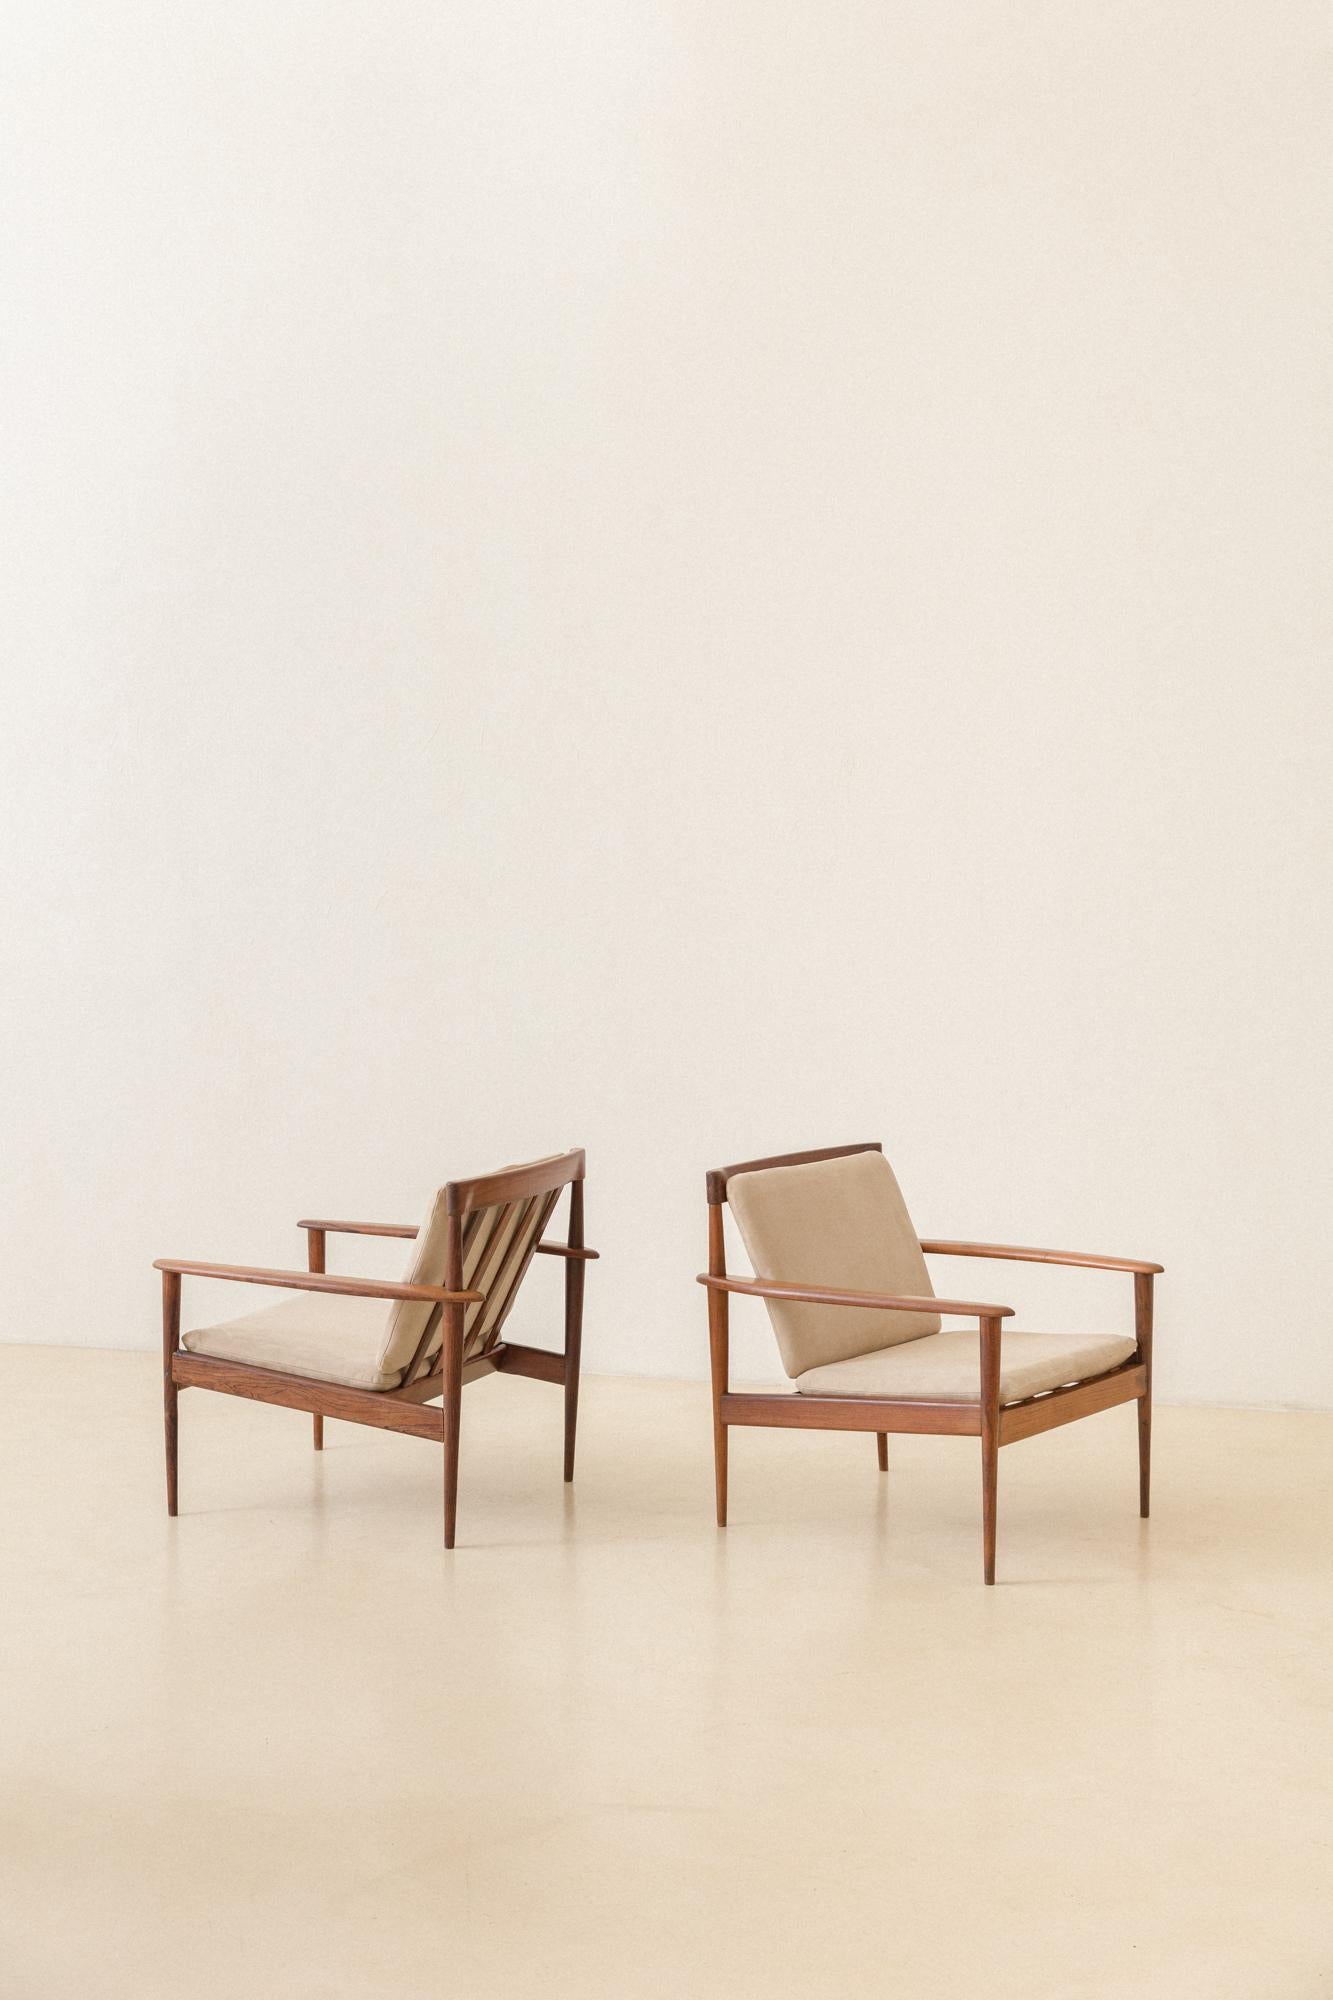 Wool Pair of Armchairs by Grete Jalk/Rino Levi, c. 1951, Brazilian Midcentury Design For Sale